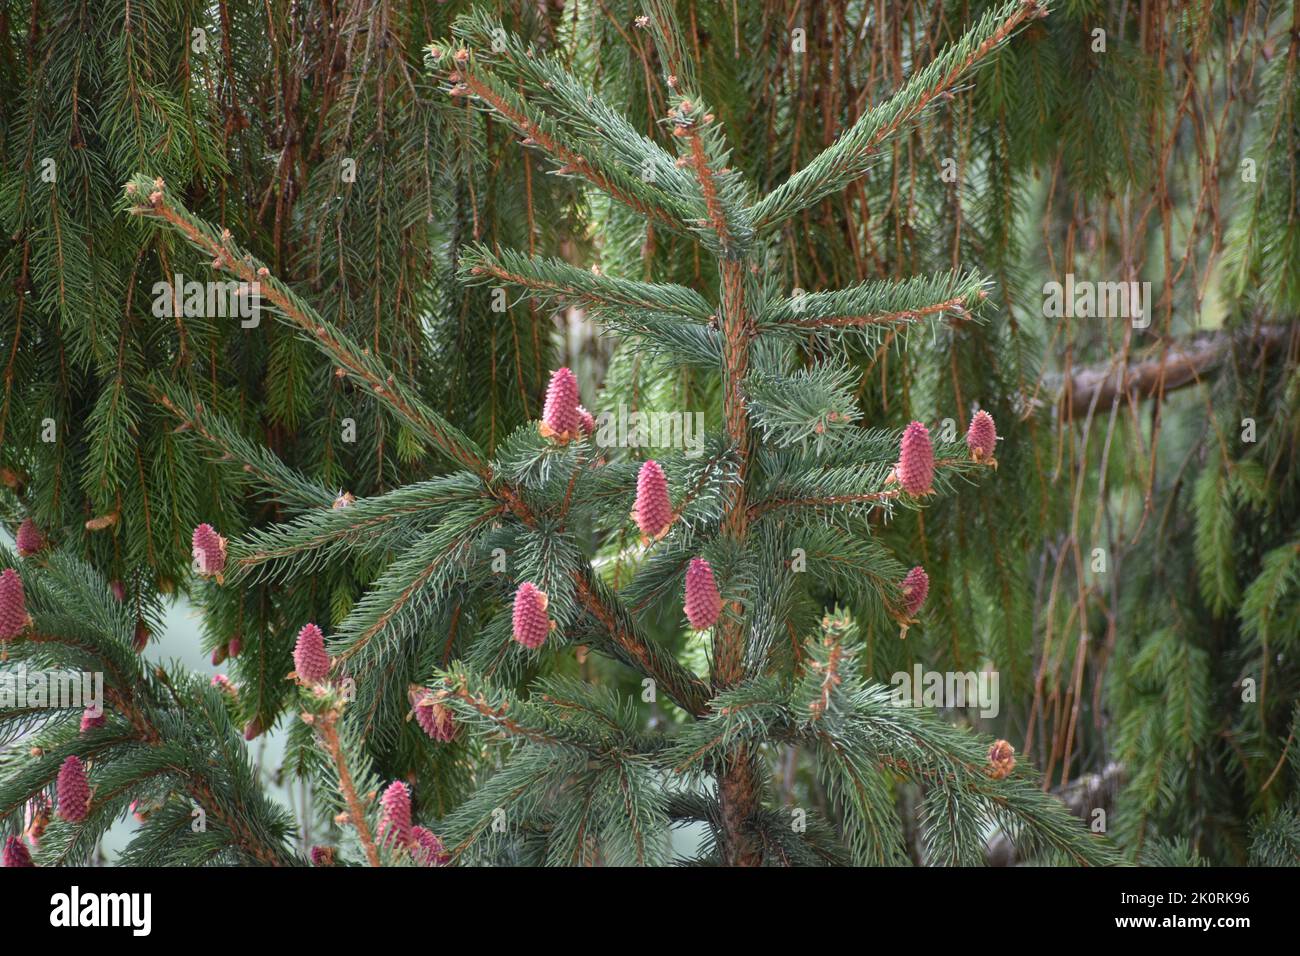 A green Picea chihuahuana tree with pink Conifer cones Stock Photo